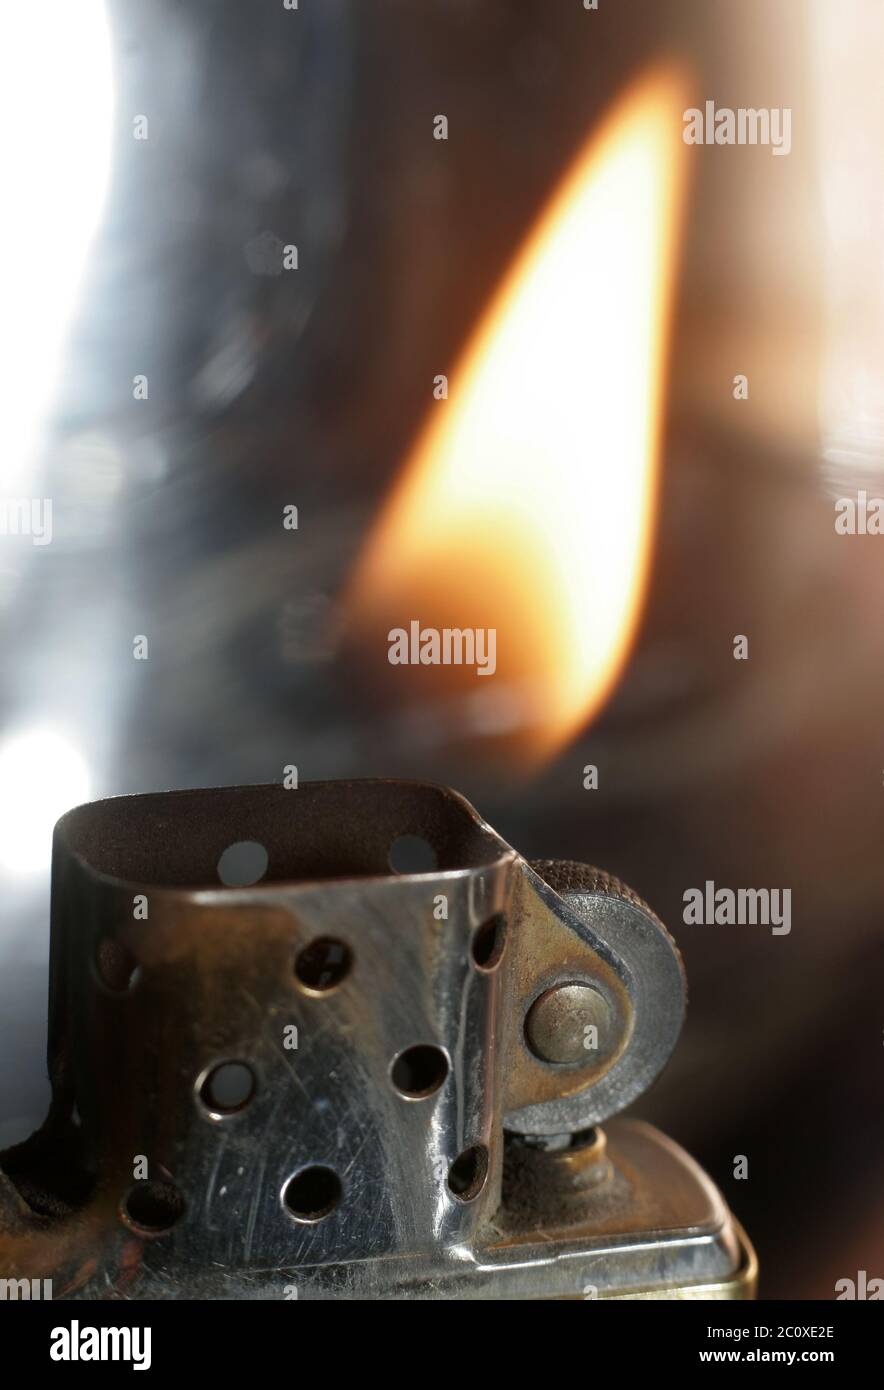 Really great macro photo of a zippo lighter. Sharp close-up and stunning flame. Stock Photo